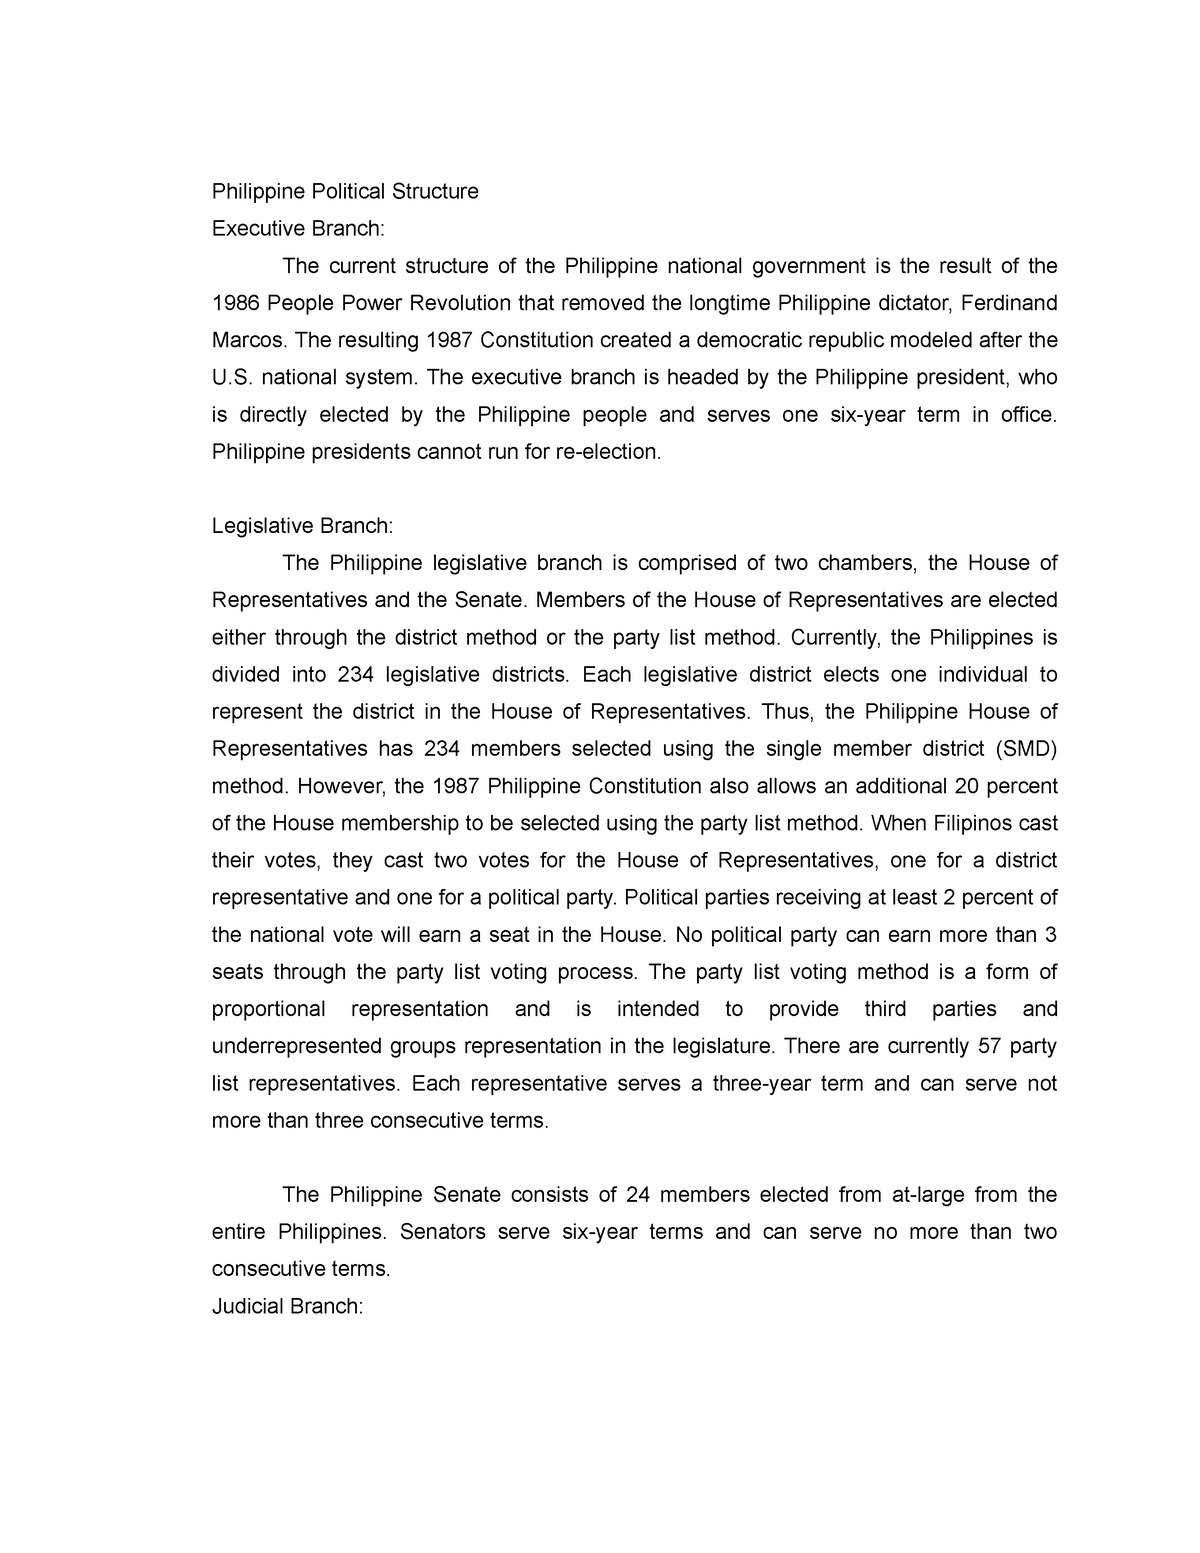 2 3 paragraph essay about the philippine political structure